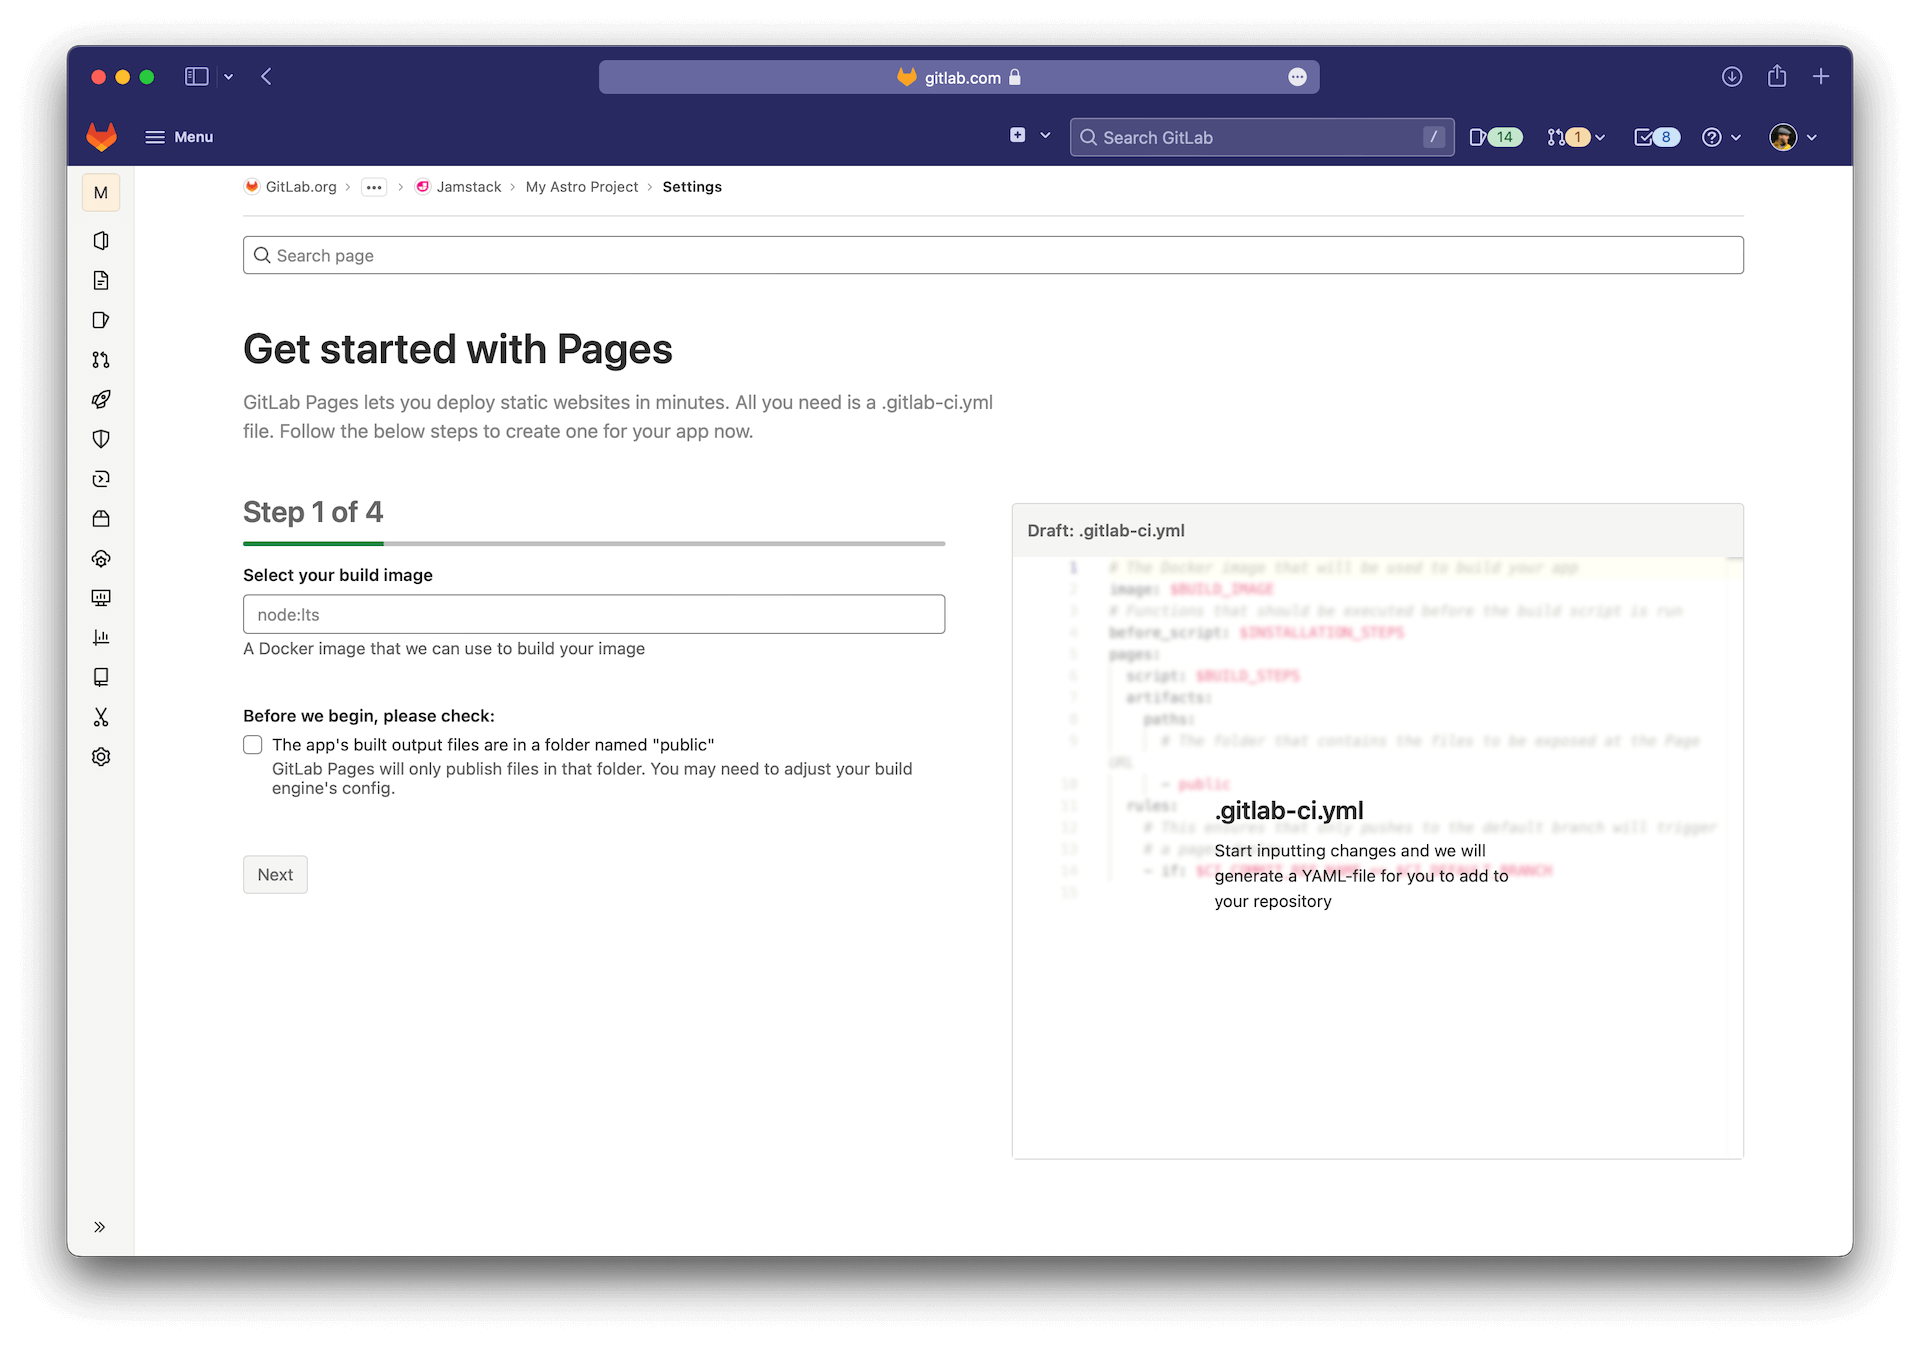 Getting started with GitLab Pages just got easier